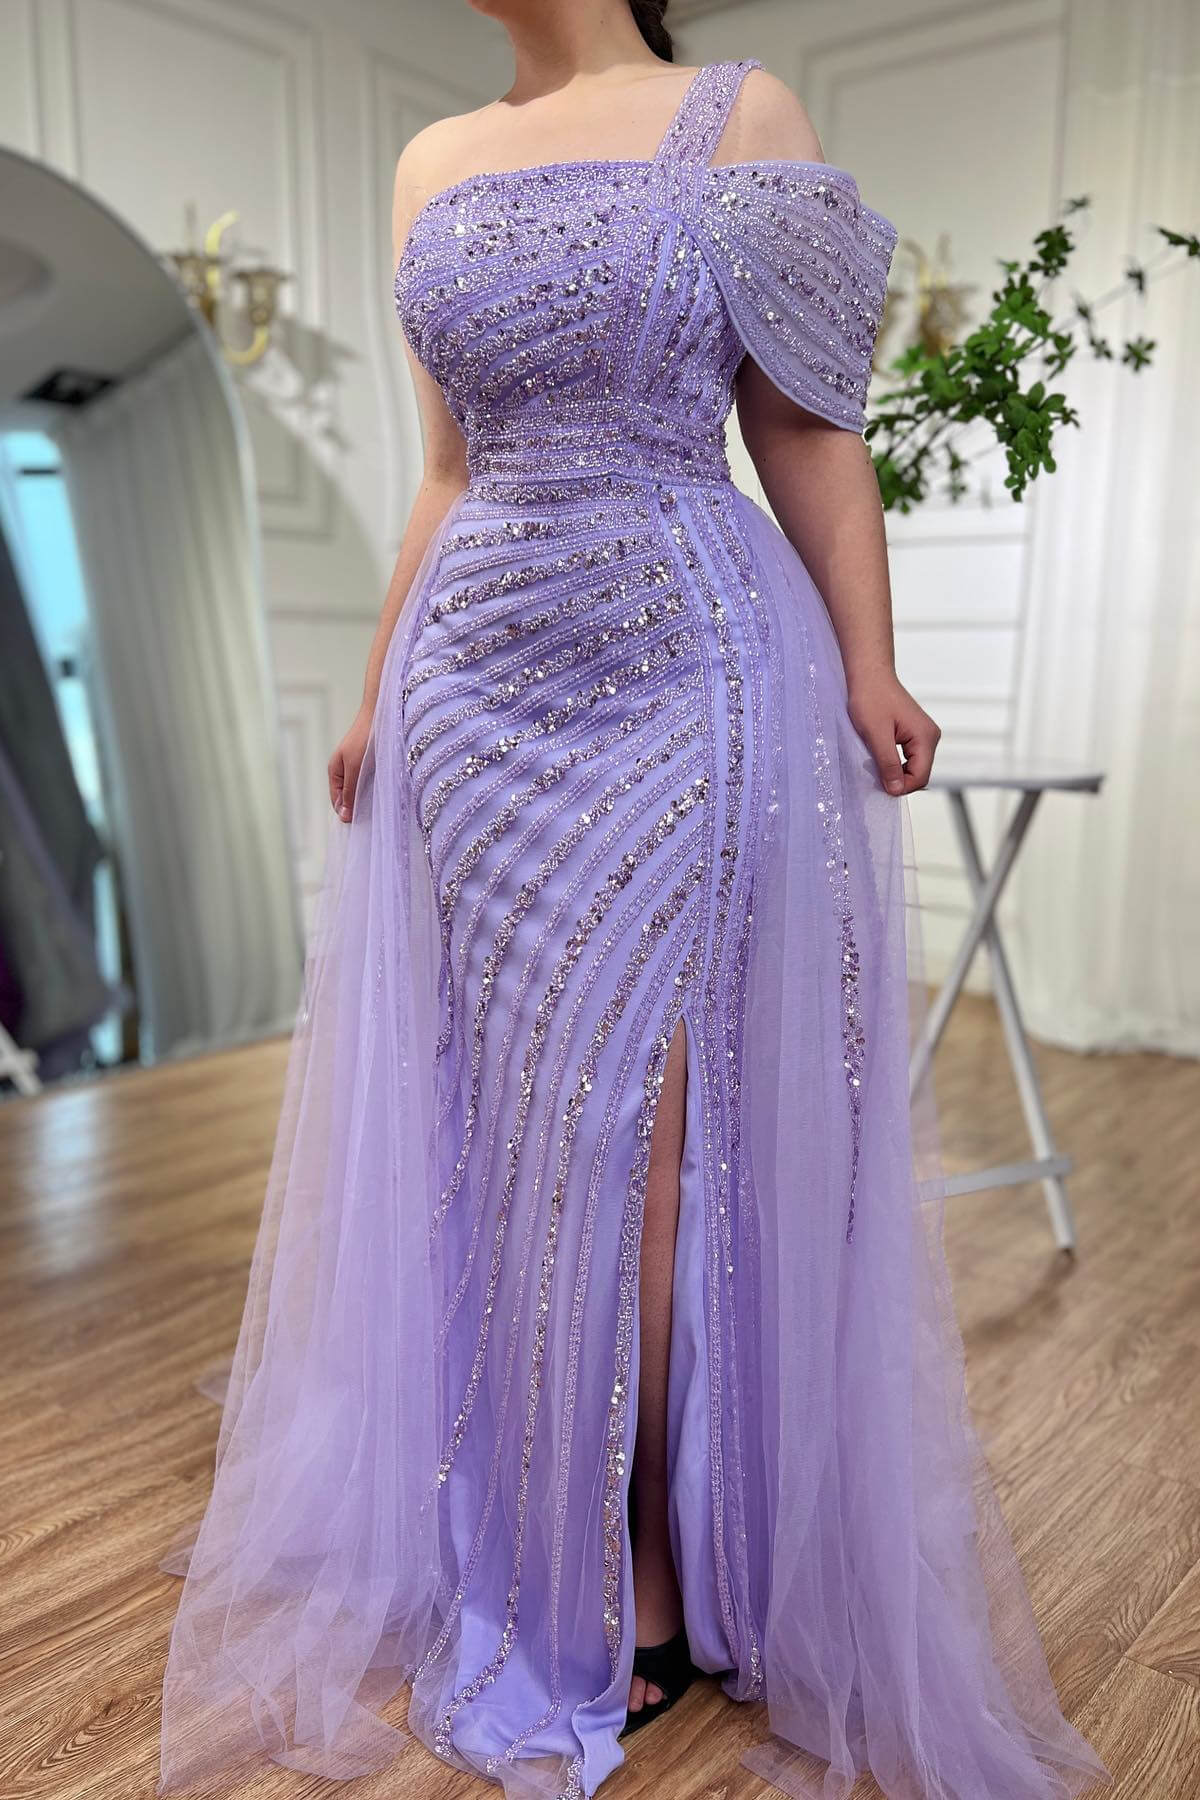 Dresseswow Lilac One Shoulder Mermaid Evening Party Dresses Beadings Long With Split